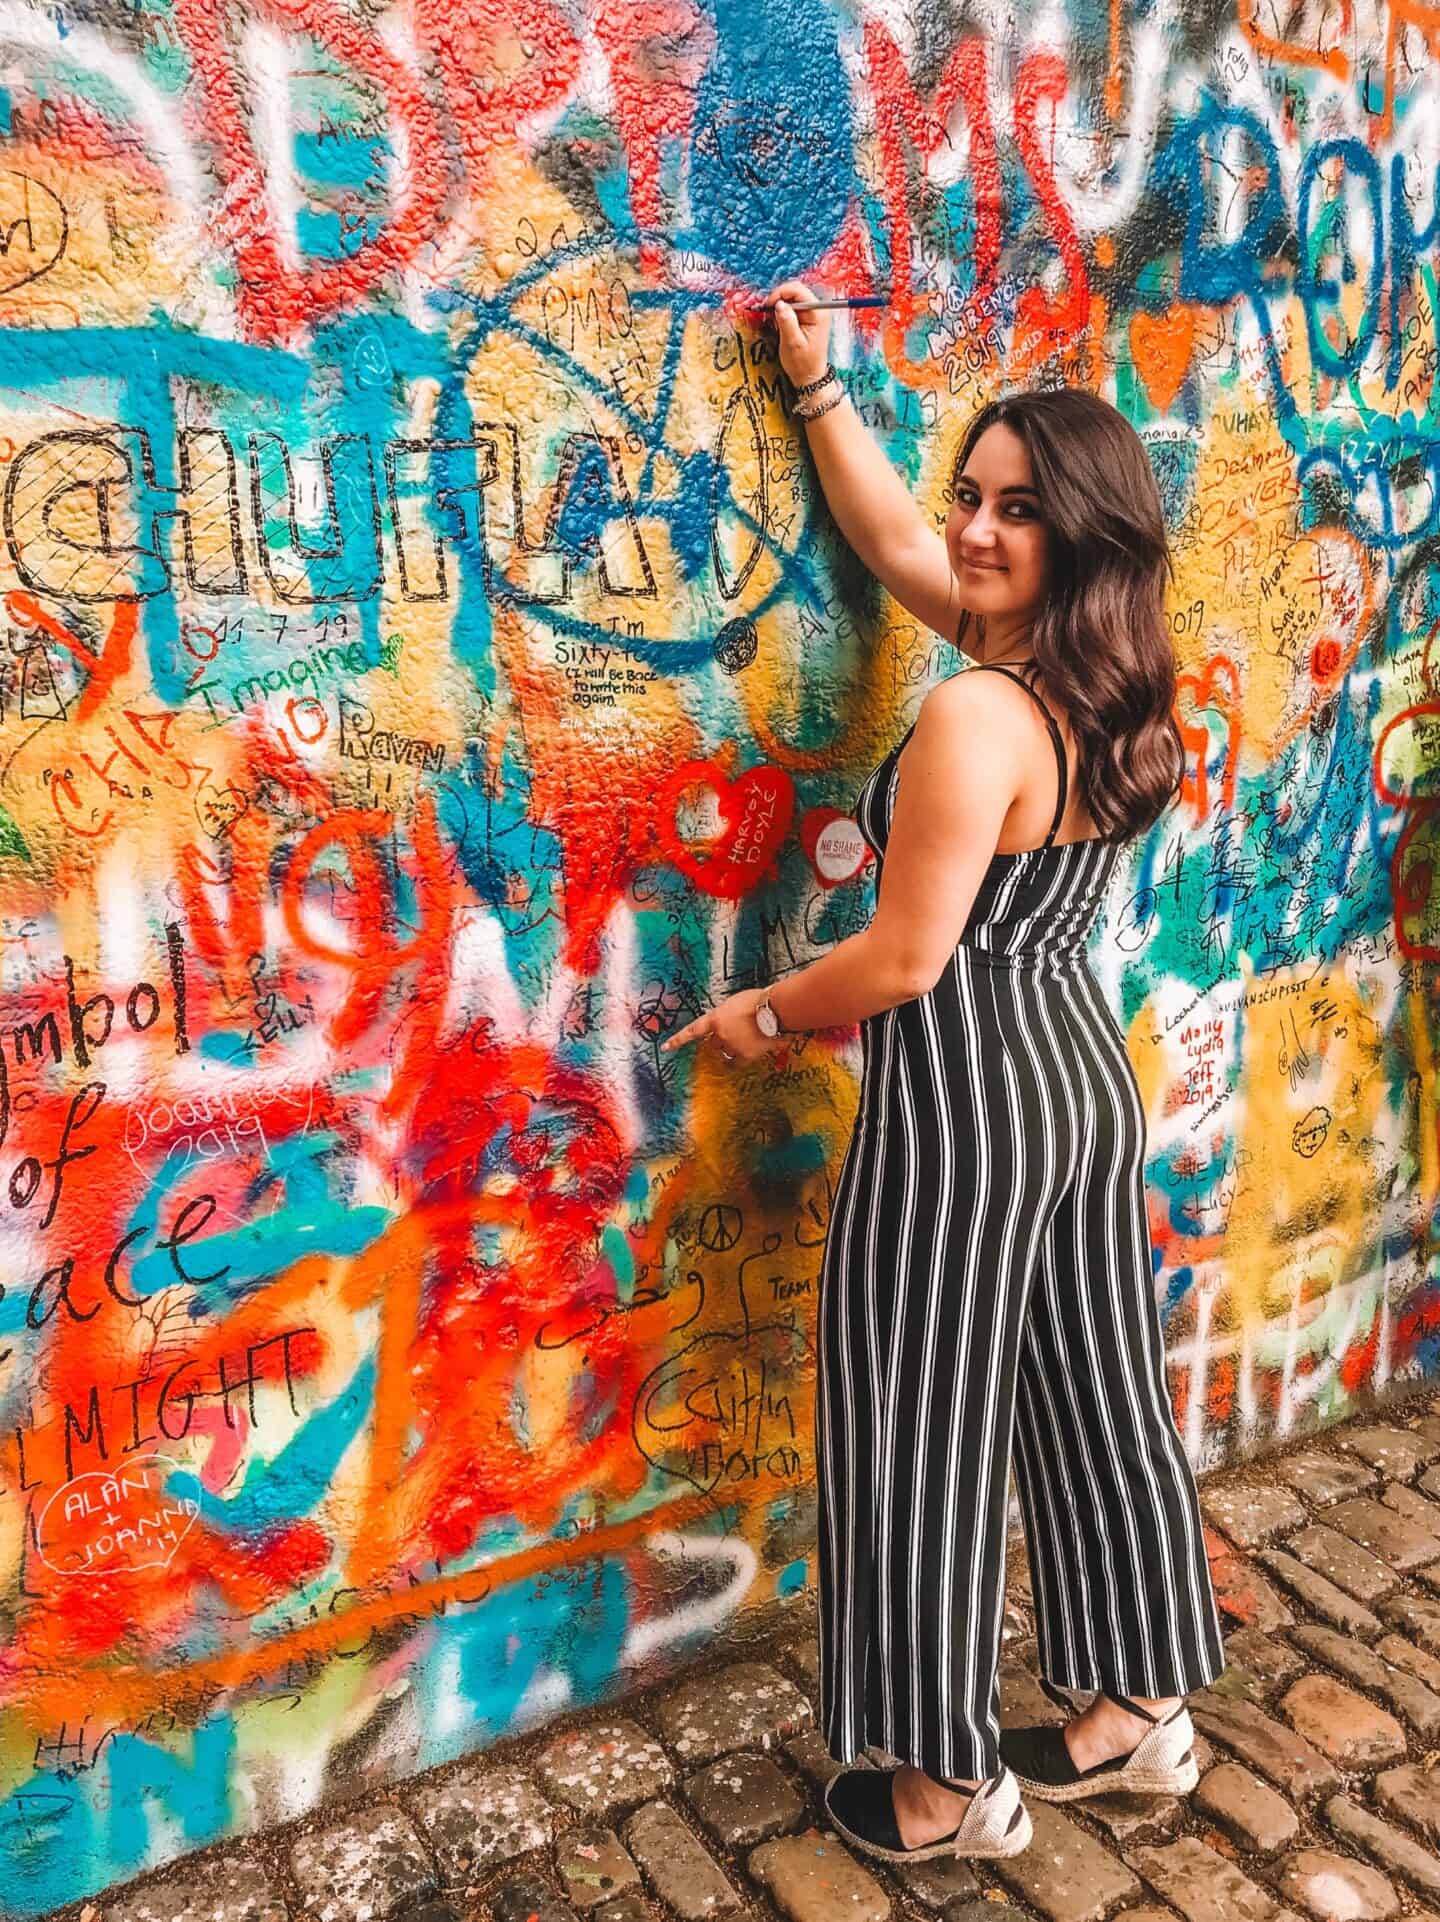 Signing the John Lennon Wall is a must-do on your 4 days in Prague itinerary.